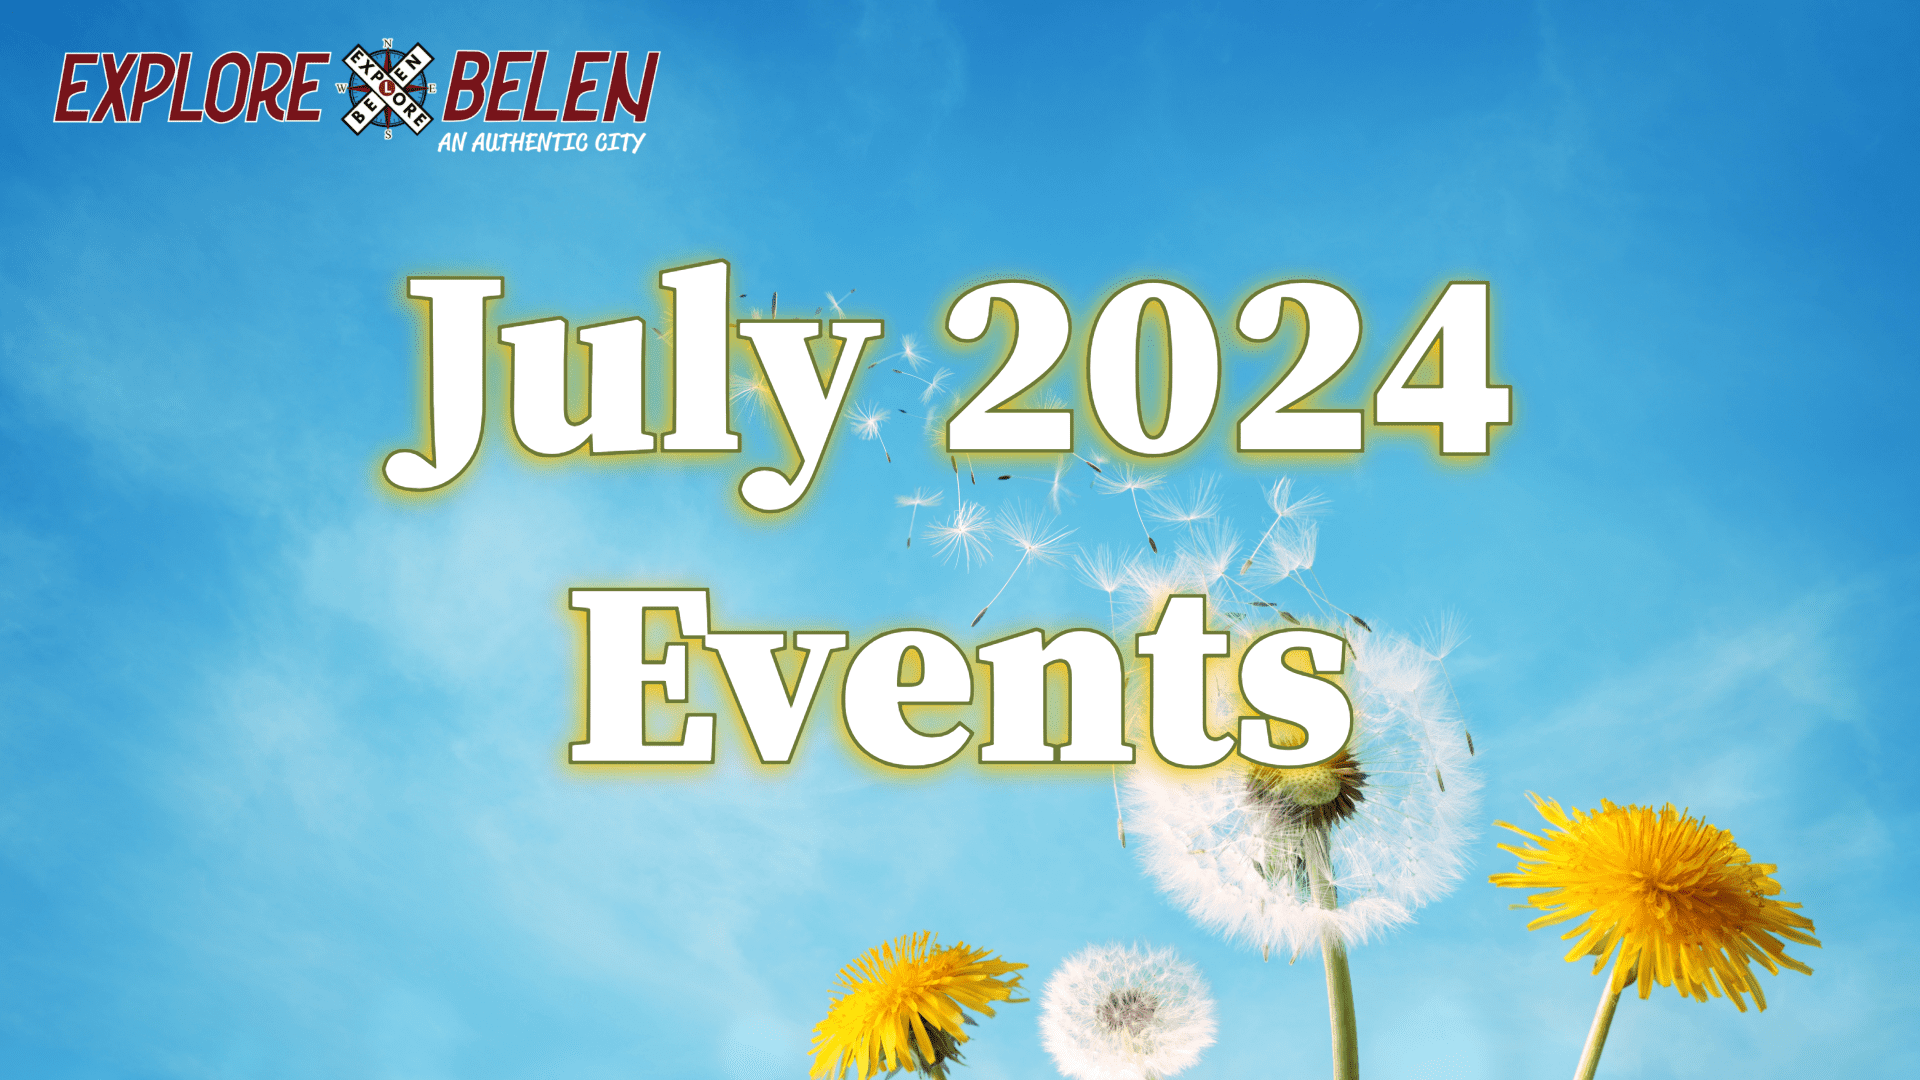 Featured image for “July 2024 Explore Belen Newsletter”